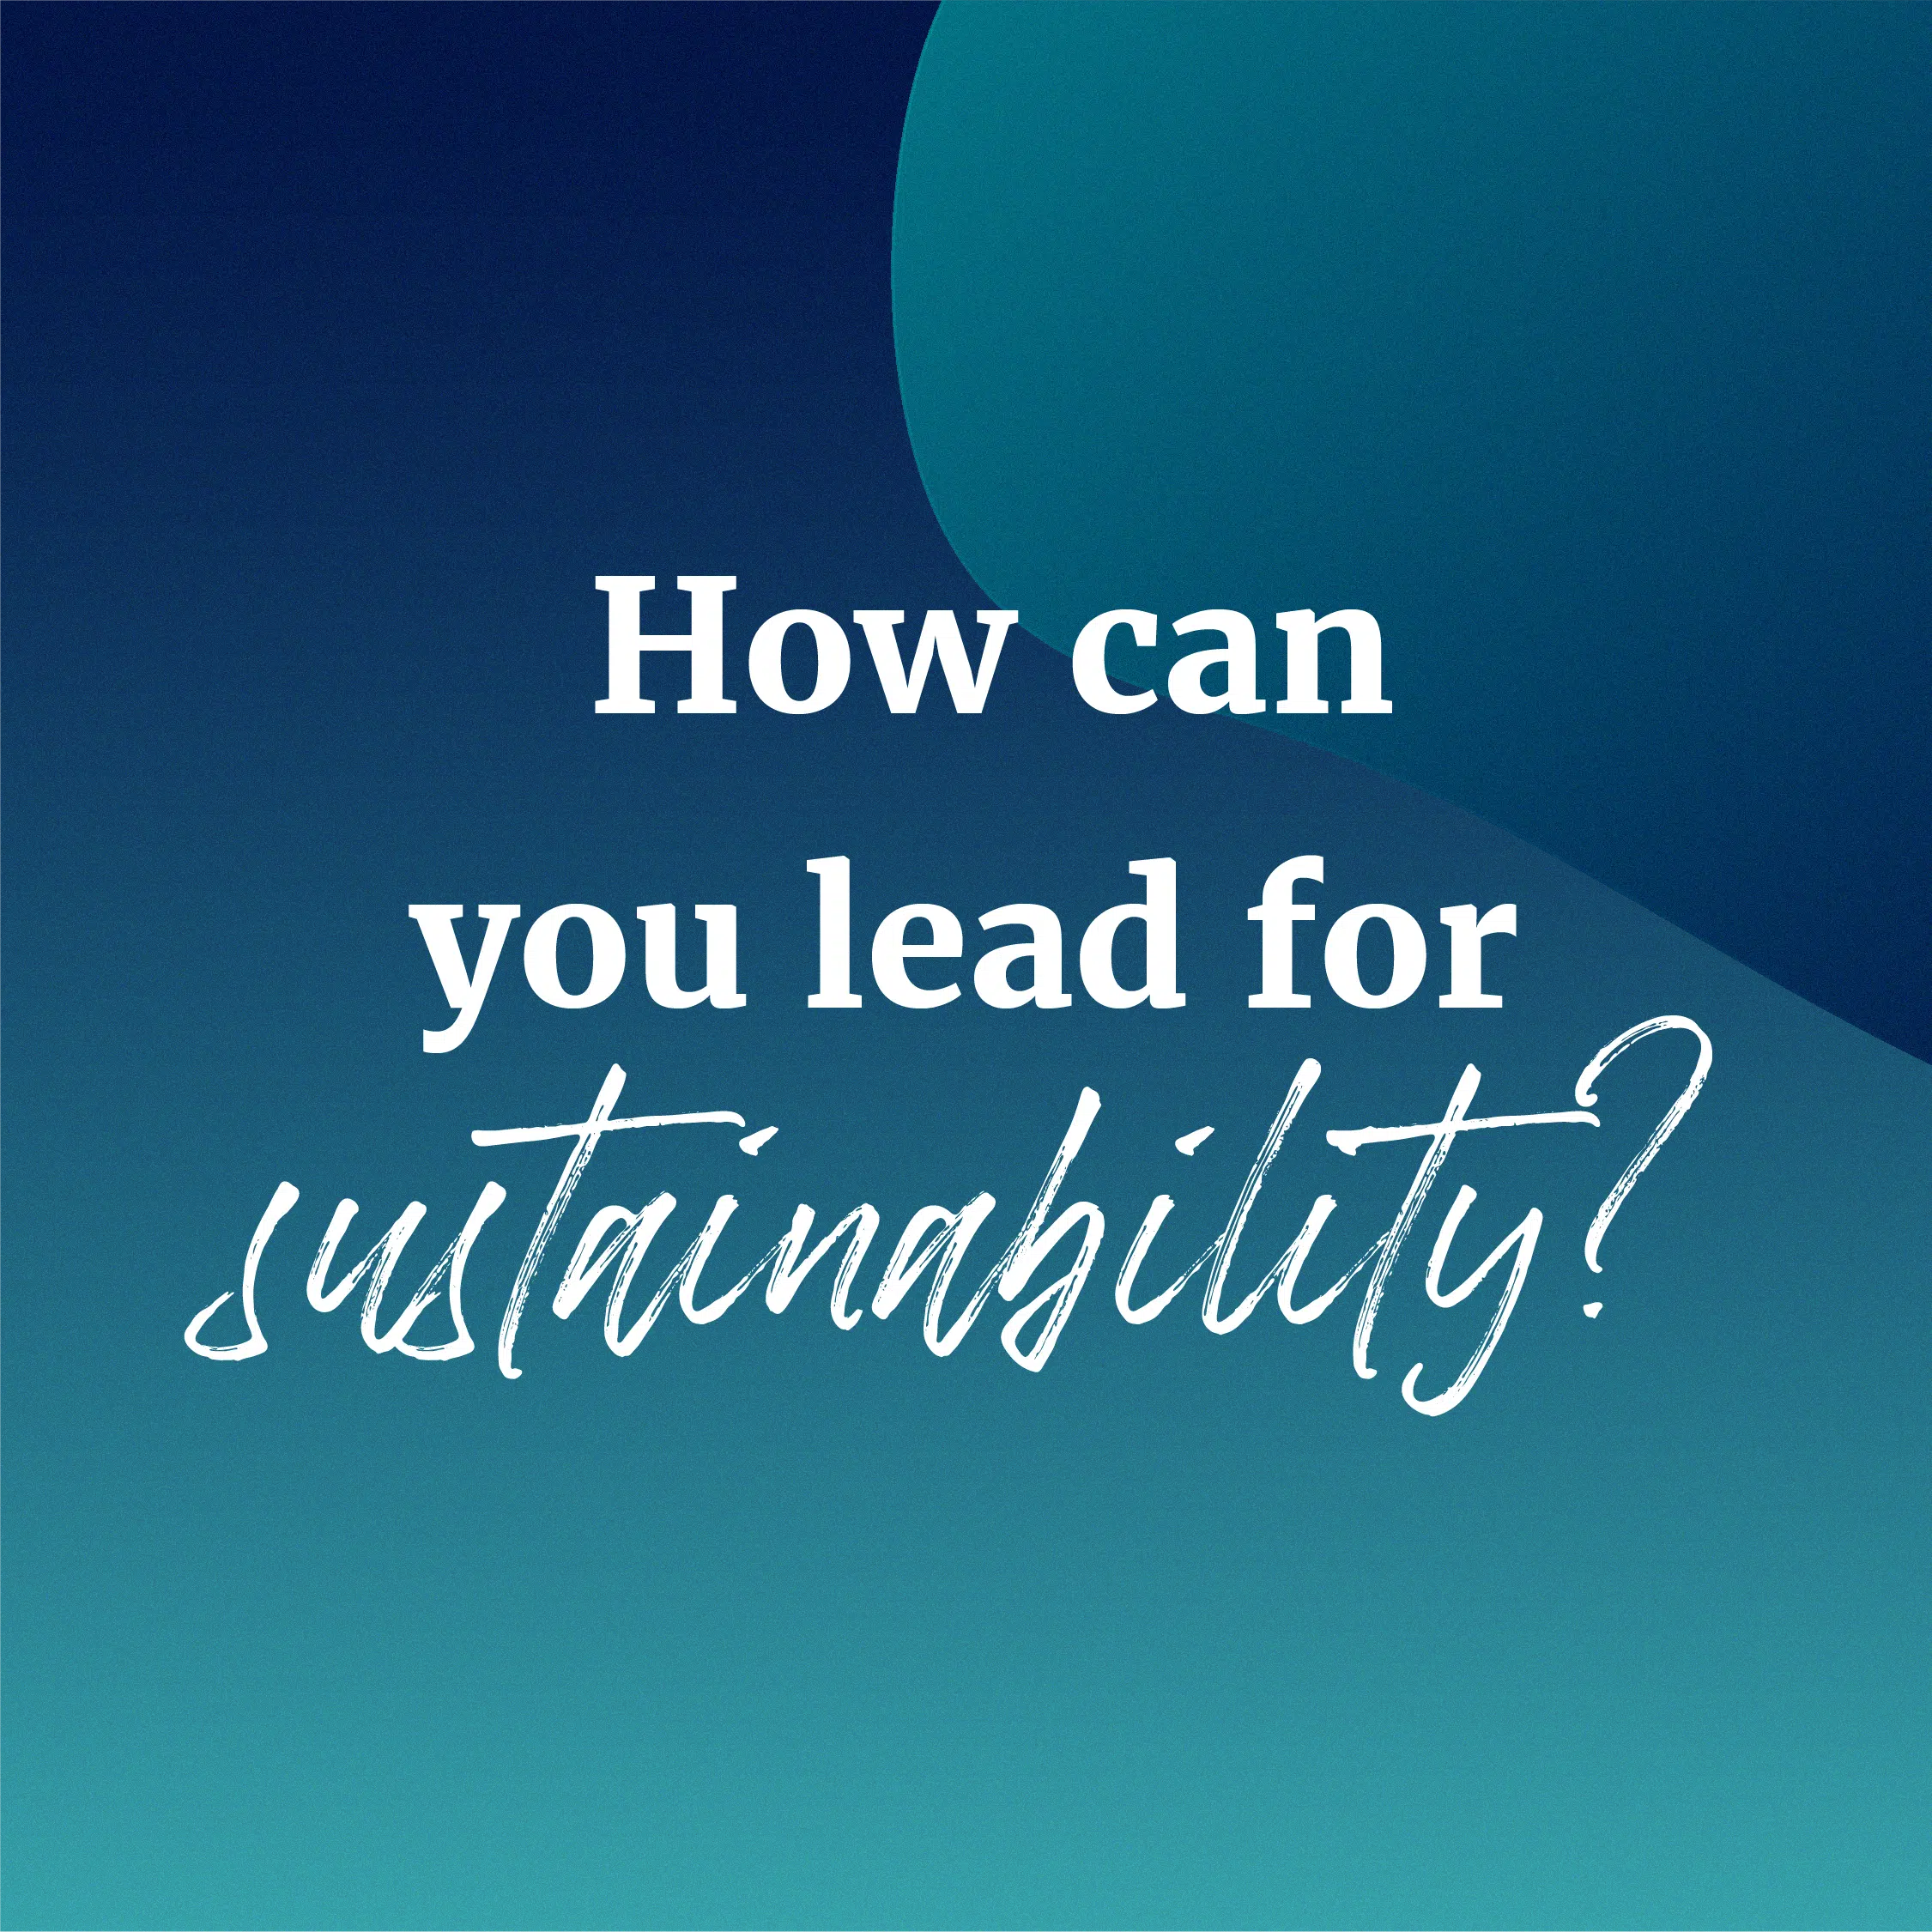 The Call to Lead for Sustainability